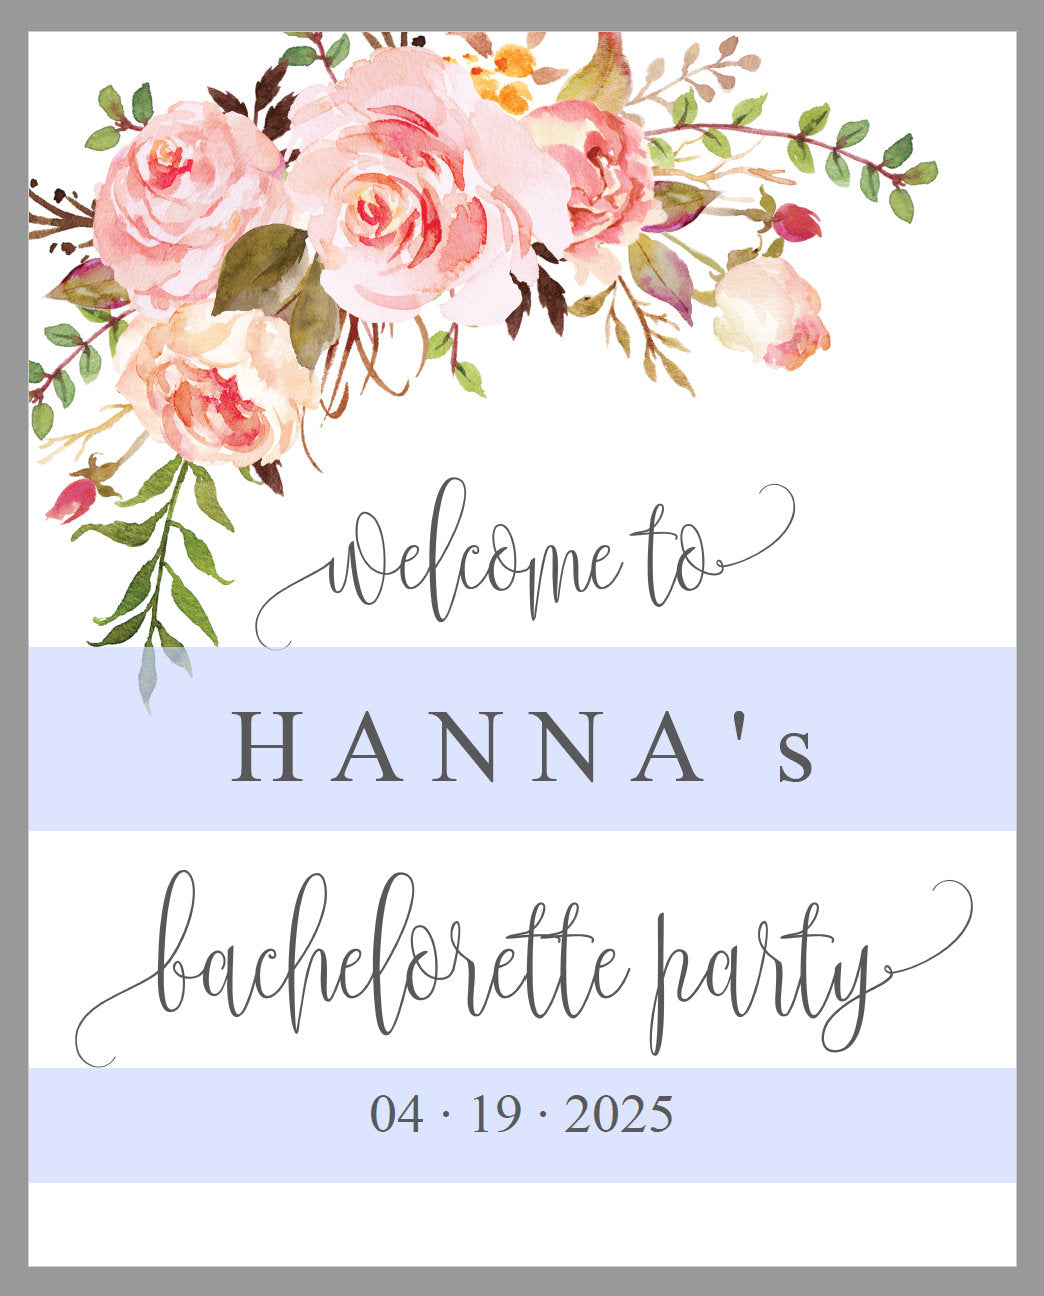 Floral Bachelorette Party Welcome Sign Printable Template Editable Instant Download Wedding Décor -HANNA SHOWER/BACH SIGNS SAVVY PAPER CO